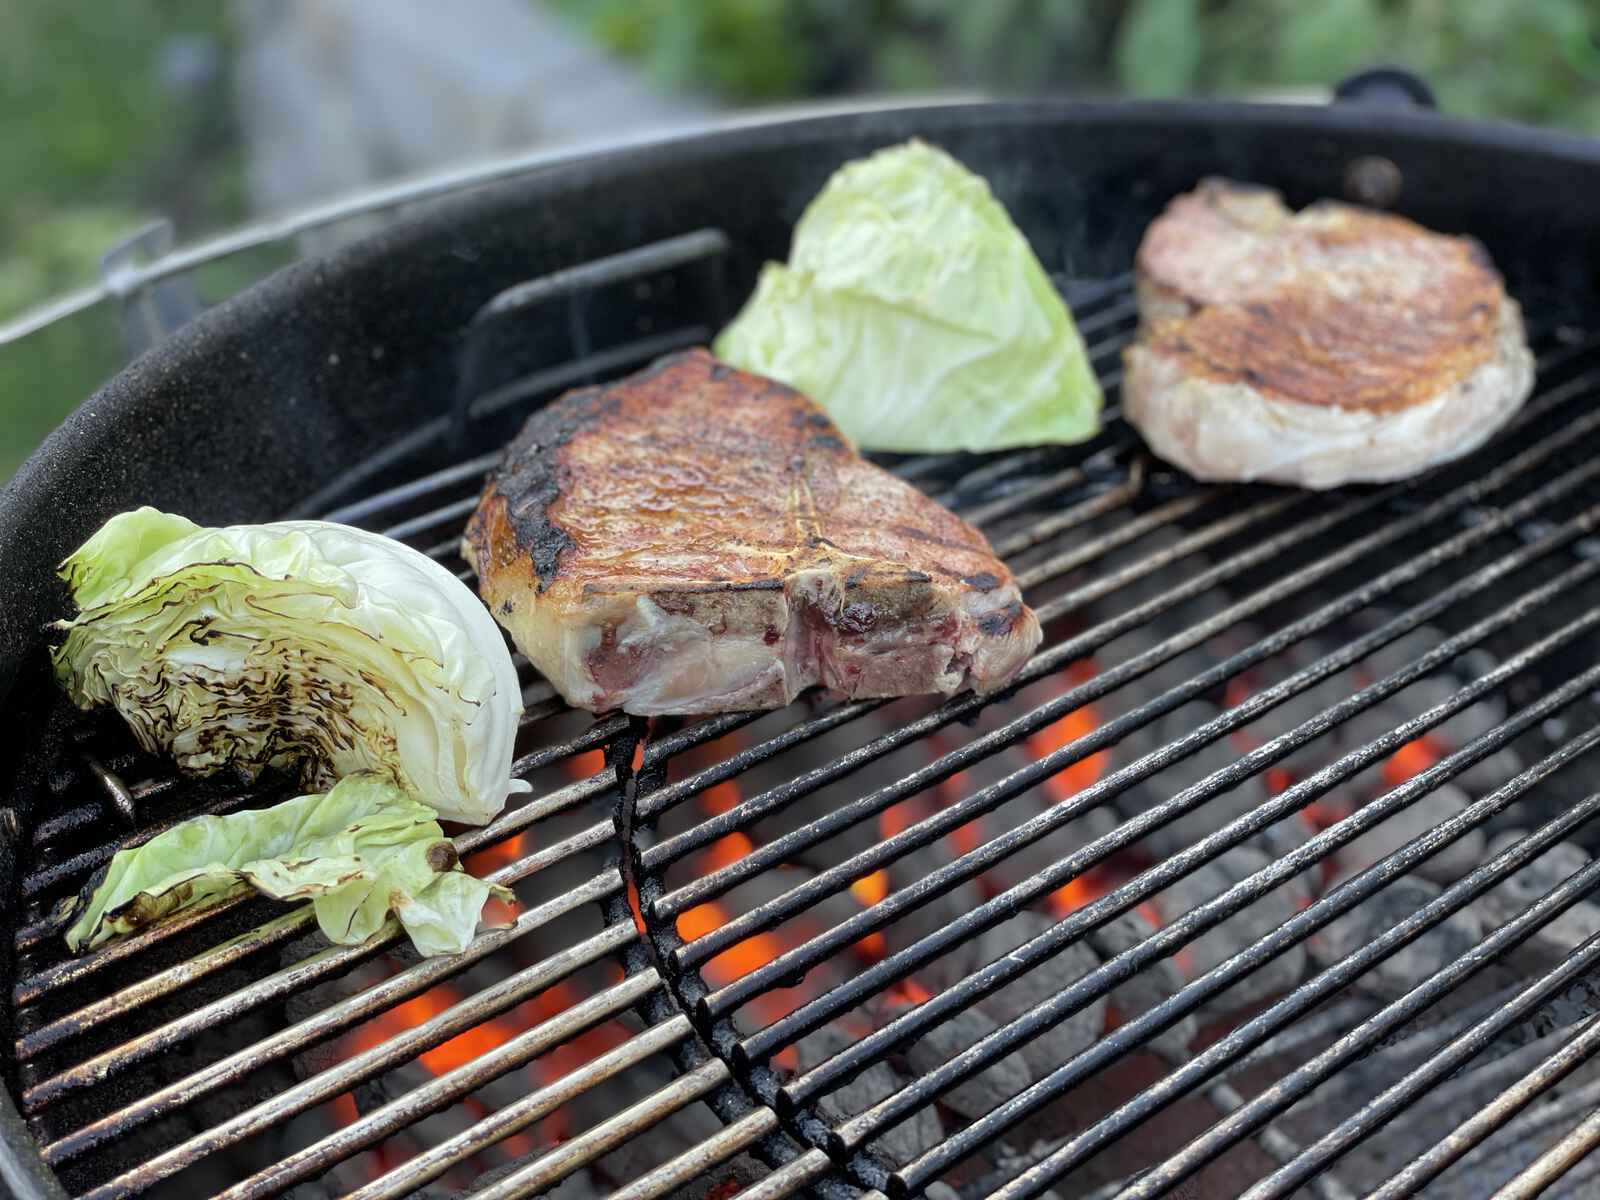 Pork chops and cabbage on a grill